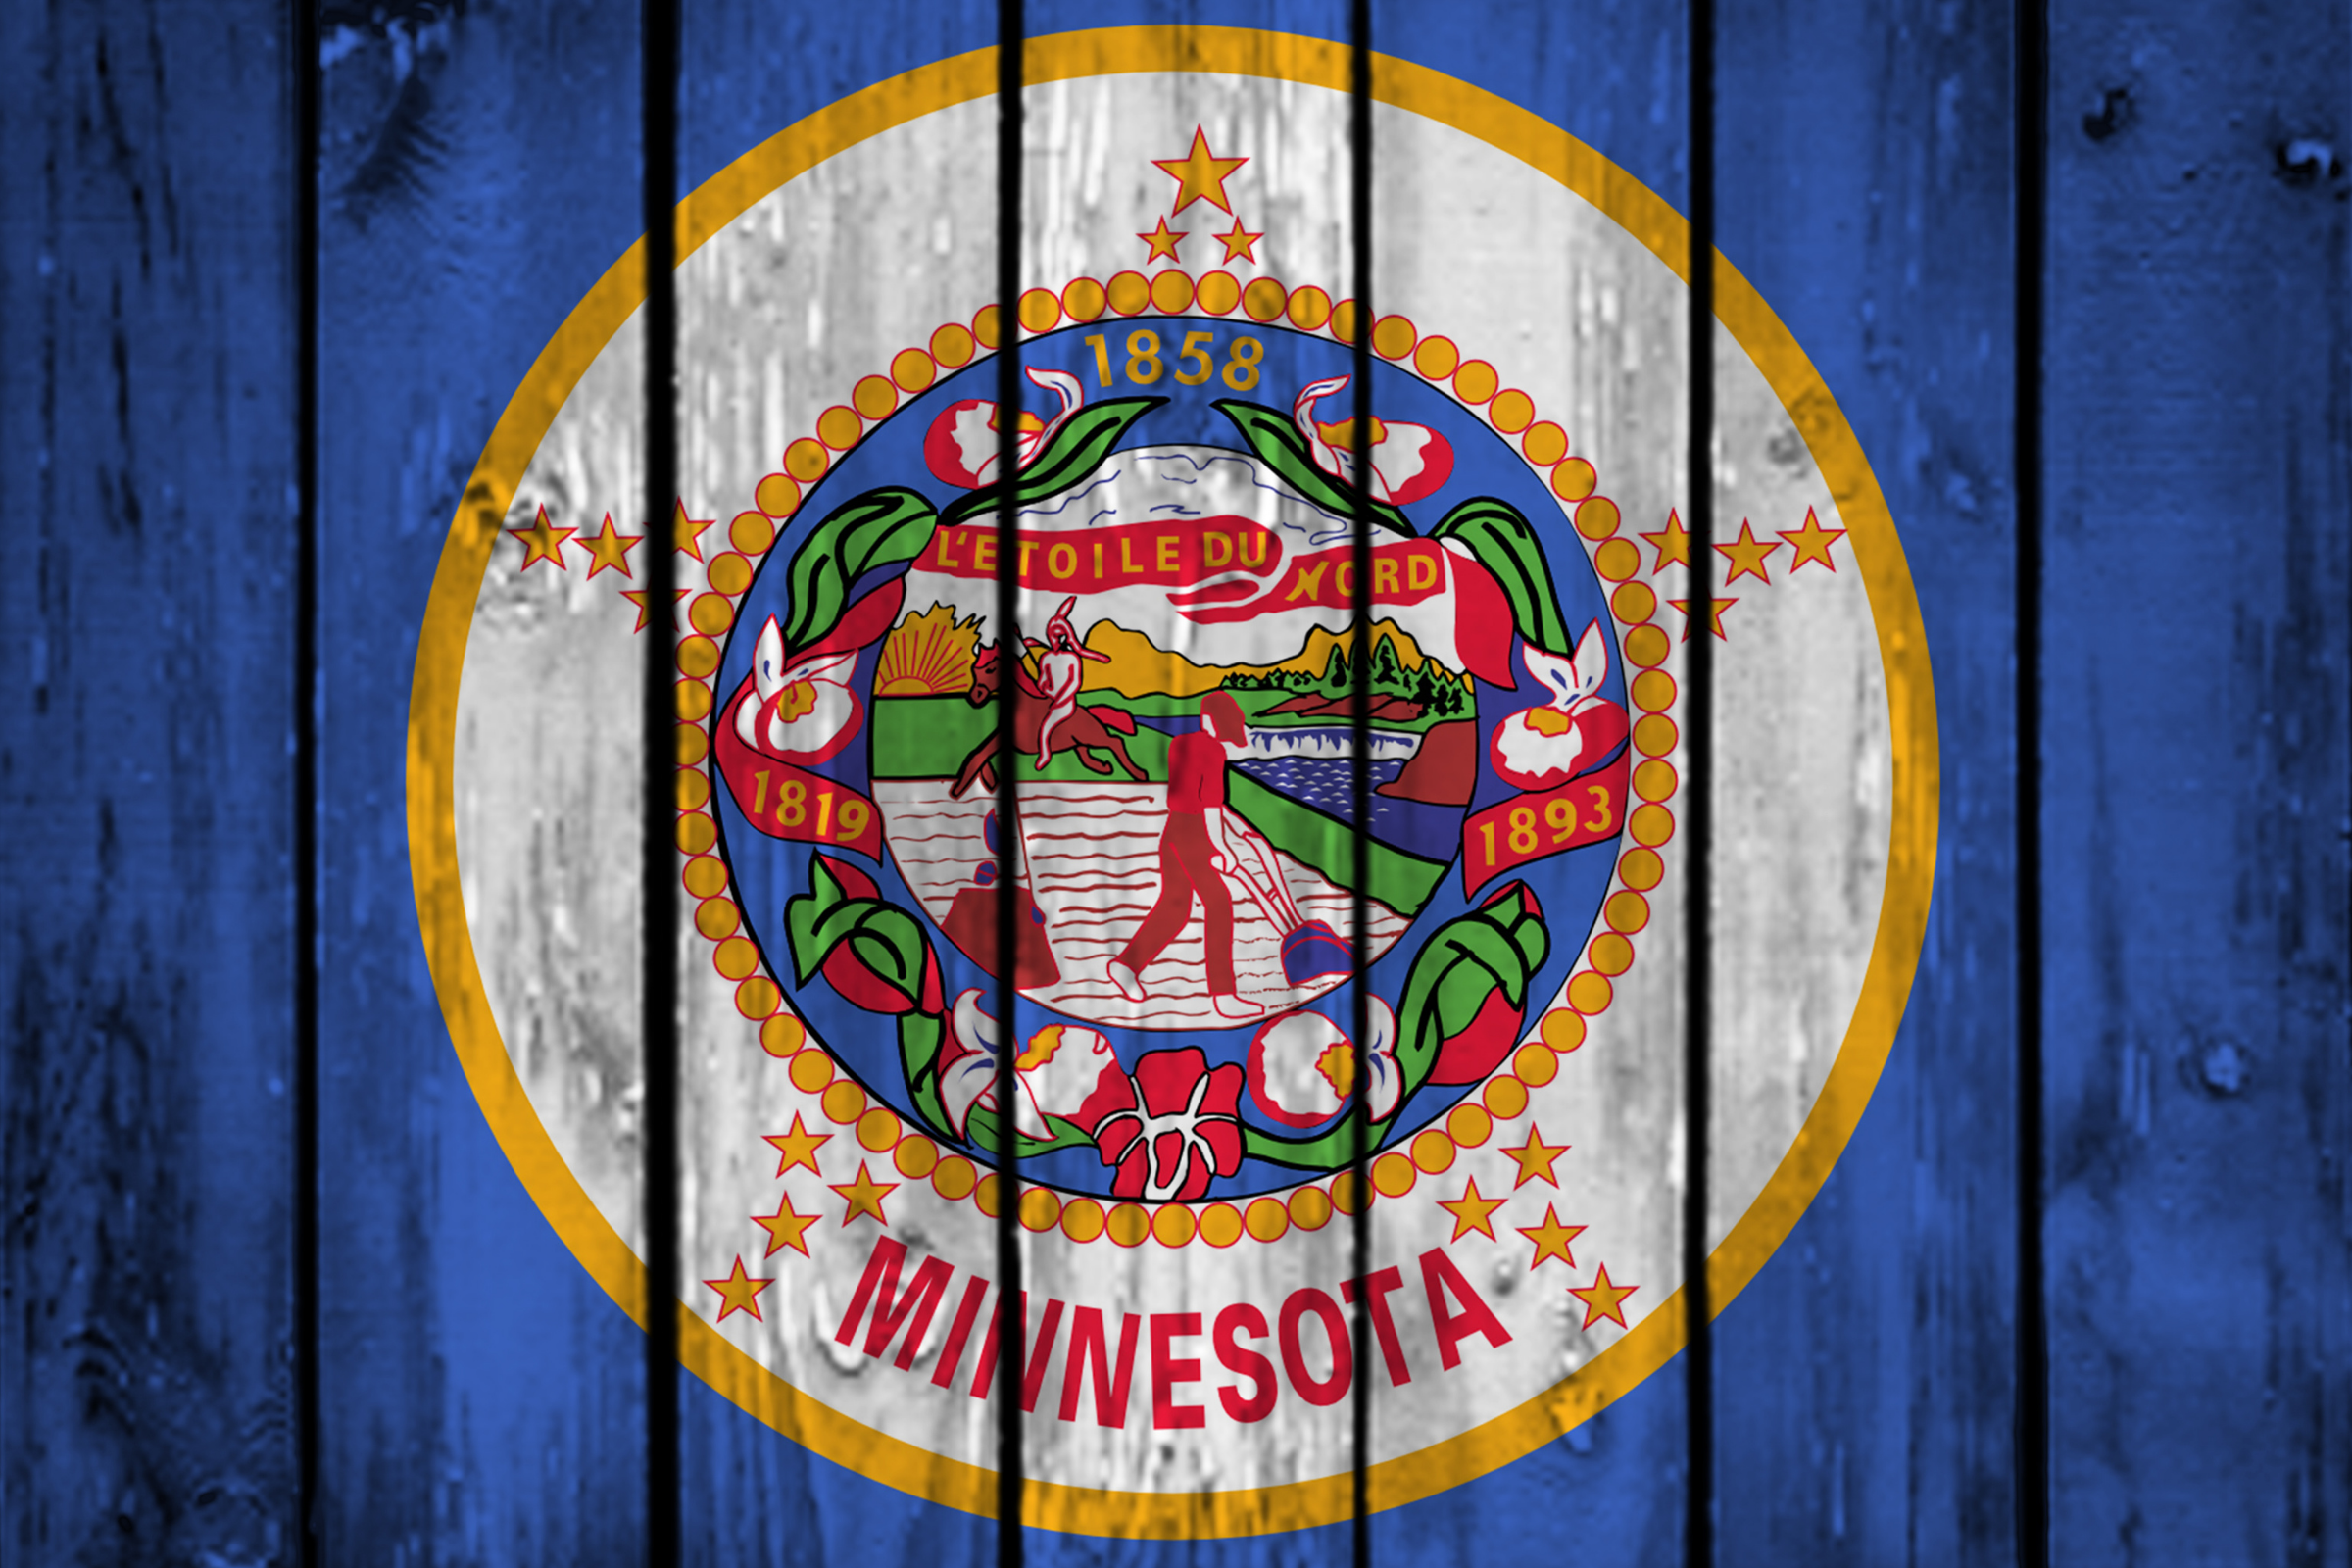 the state seal of minnesota painted brightly on wooden planks